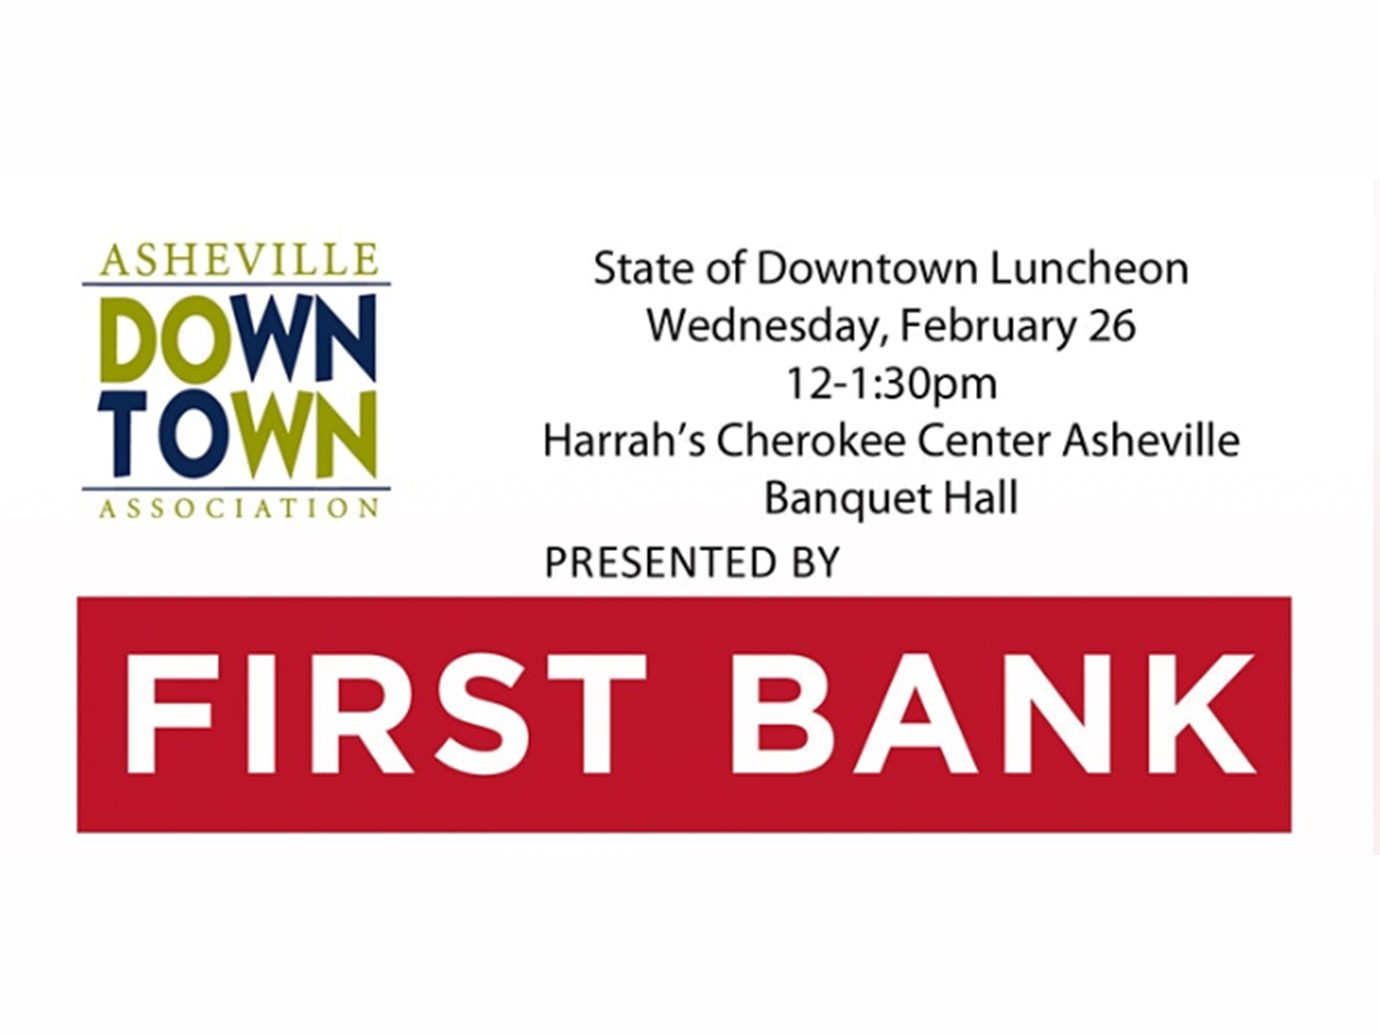 State of Downtown Luncheon